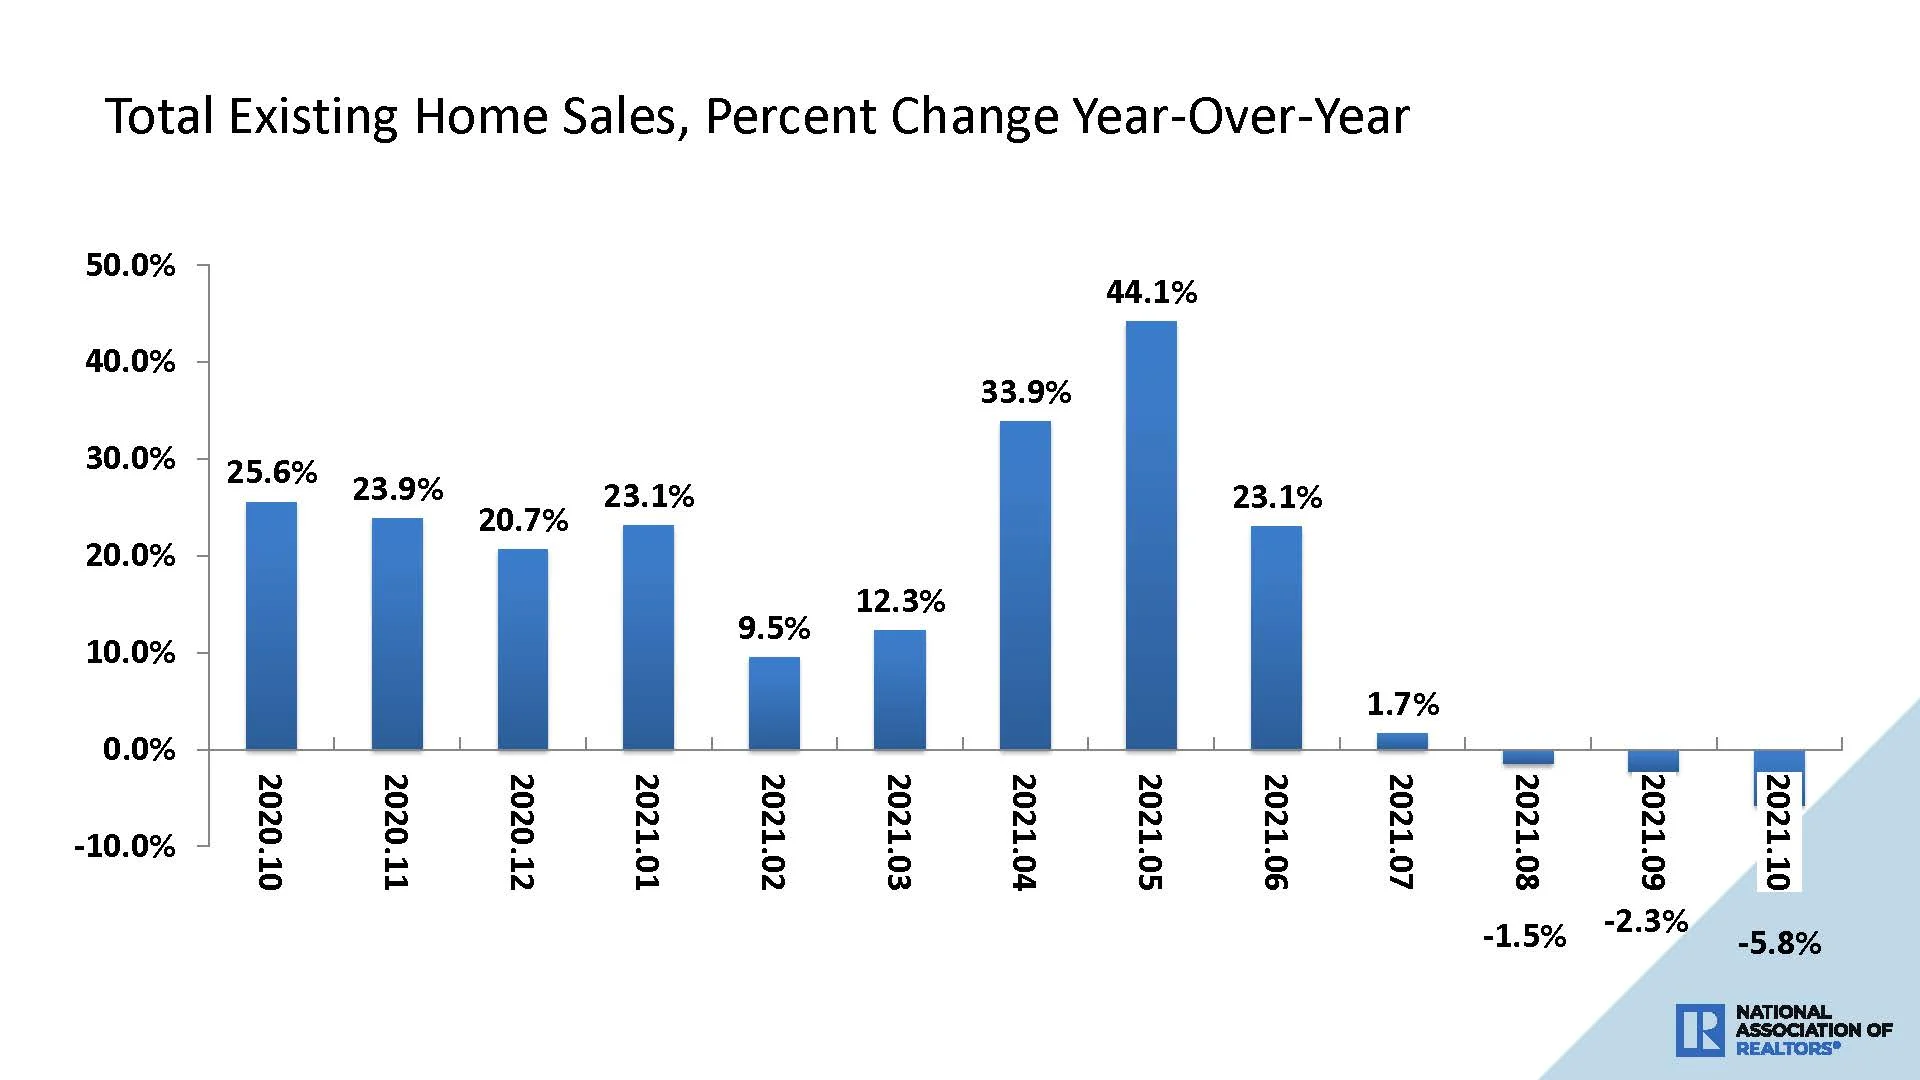 a graph showing total existing home sales percent change year-over-year